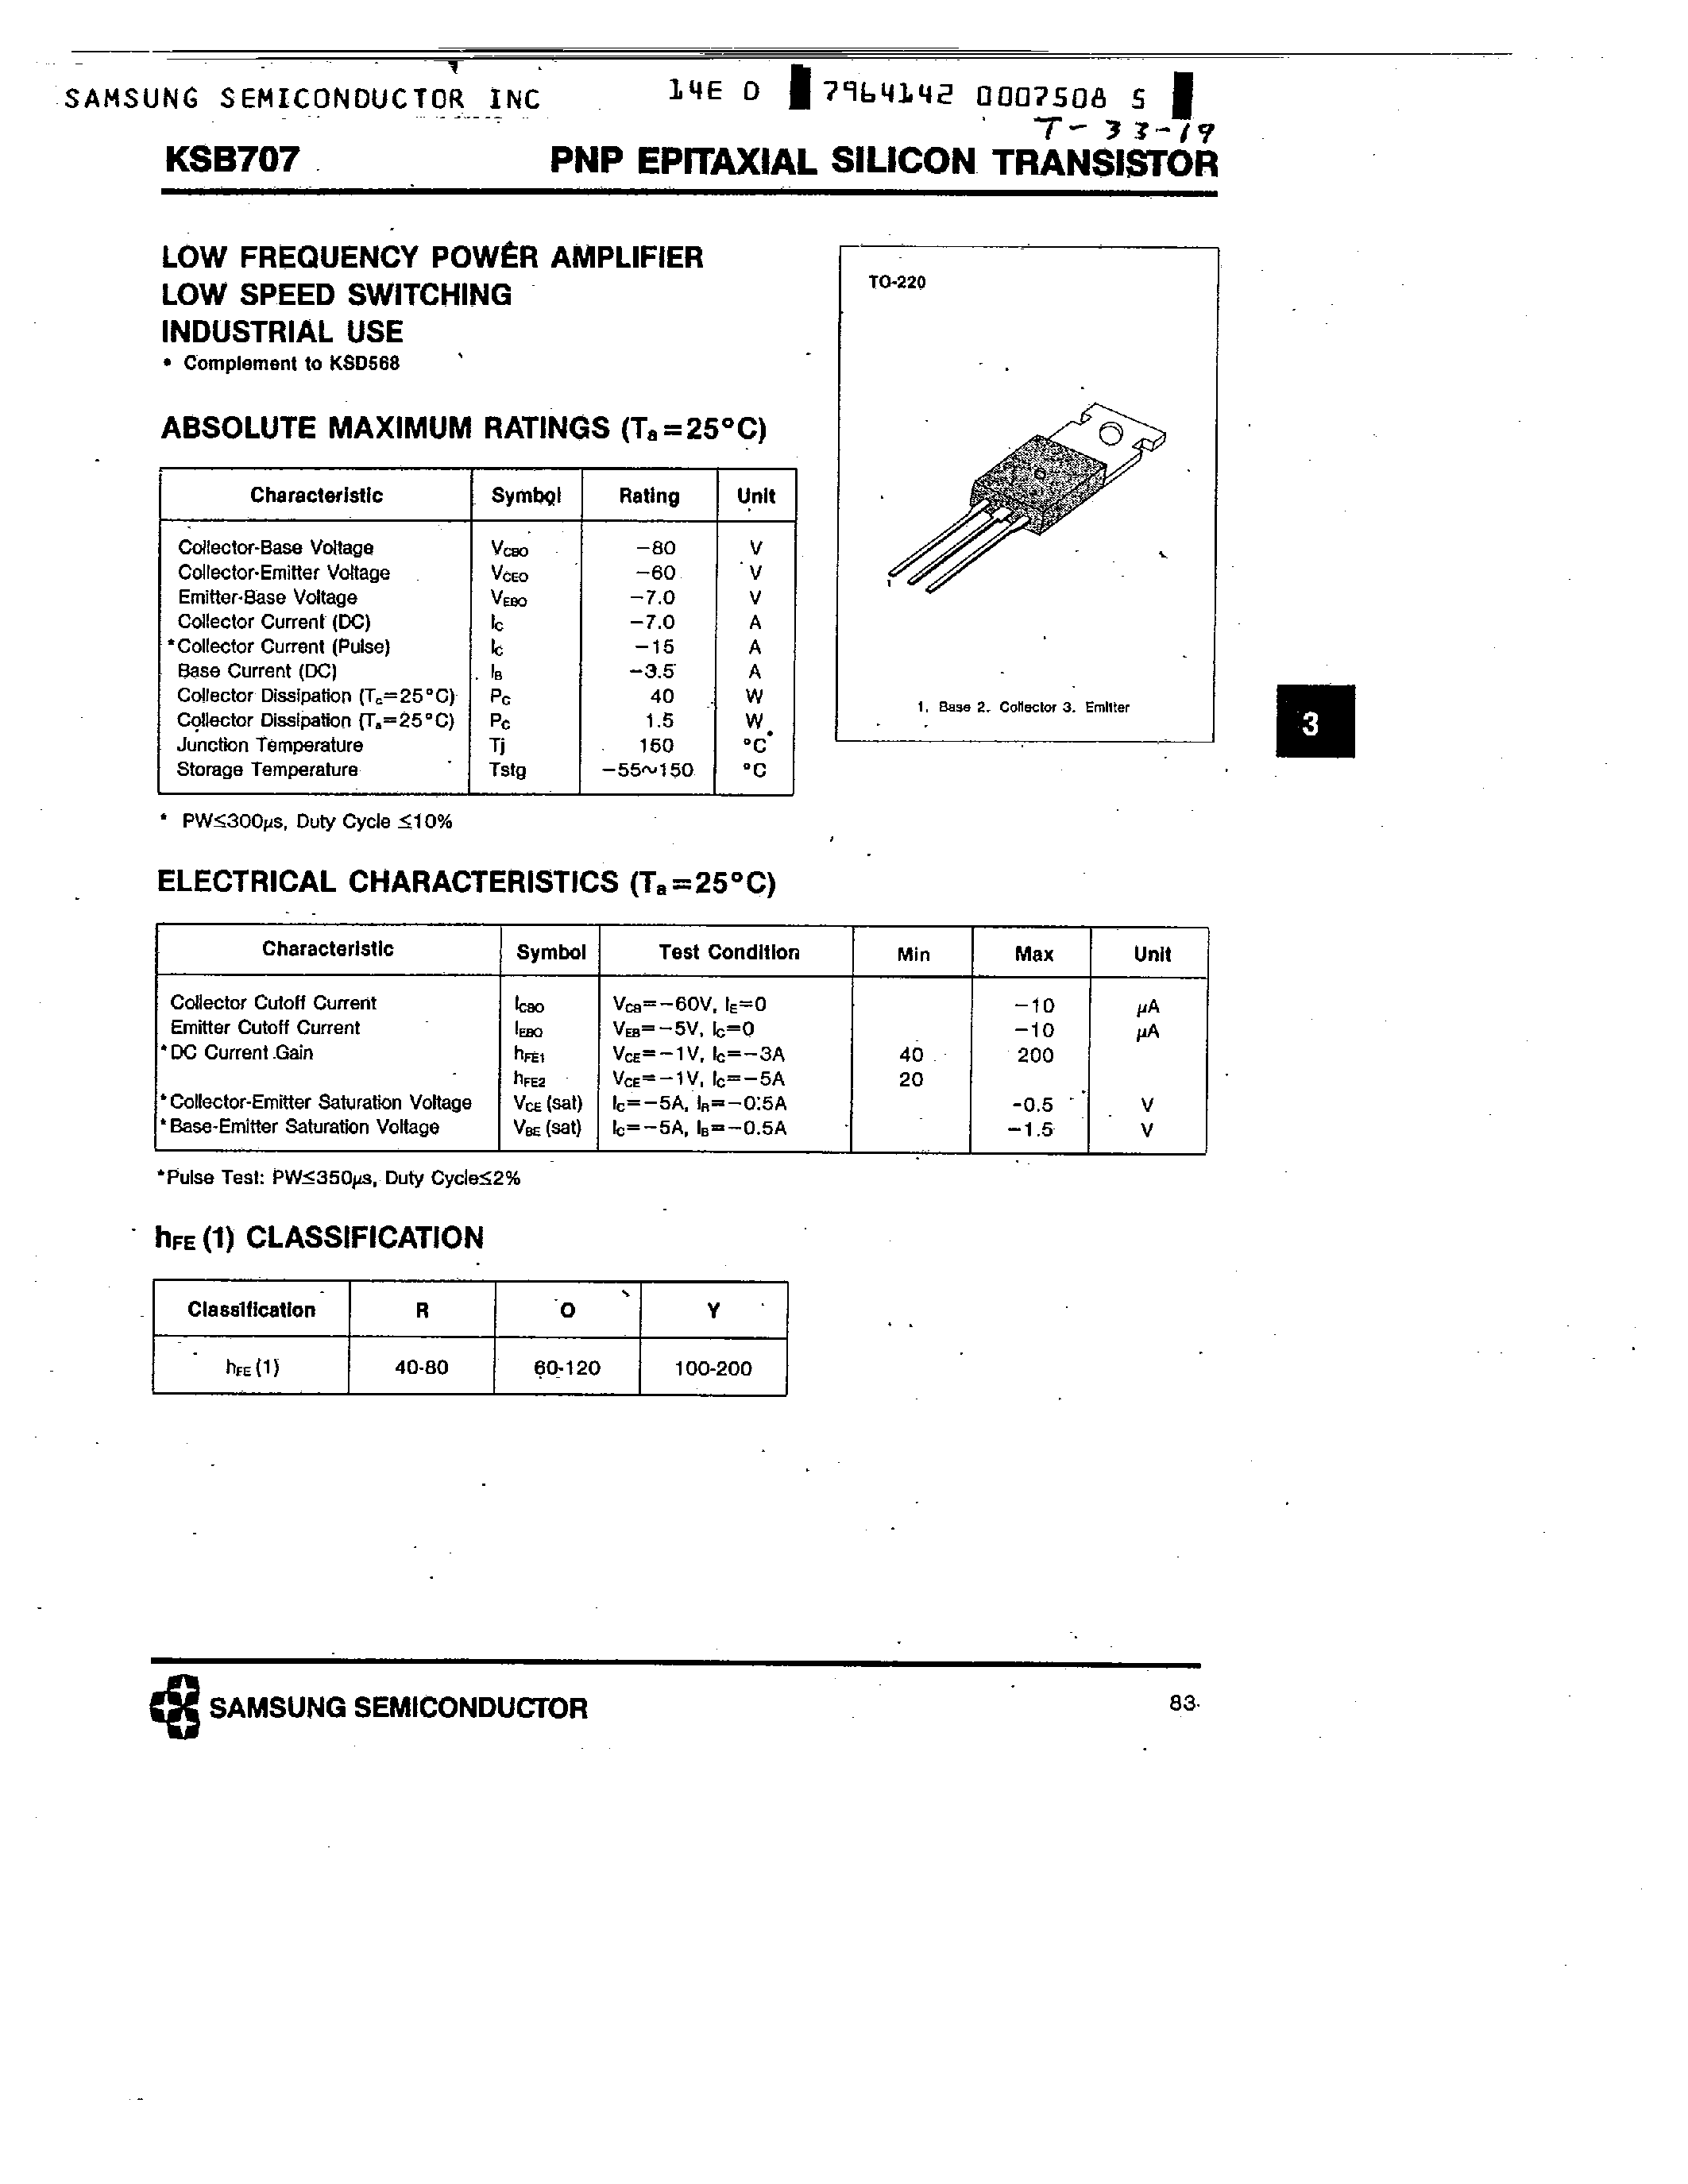 Datasheet KSB707 - PNP (LOW FREQUENCY POWER AMPLIFIER) page 1